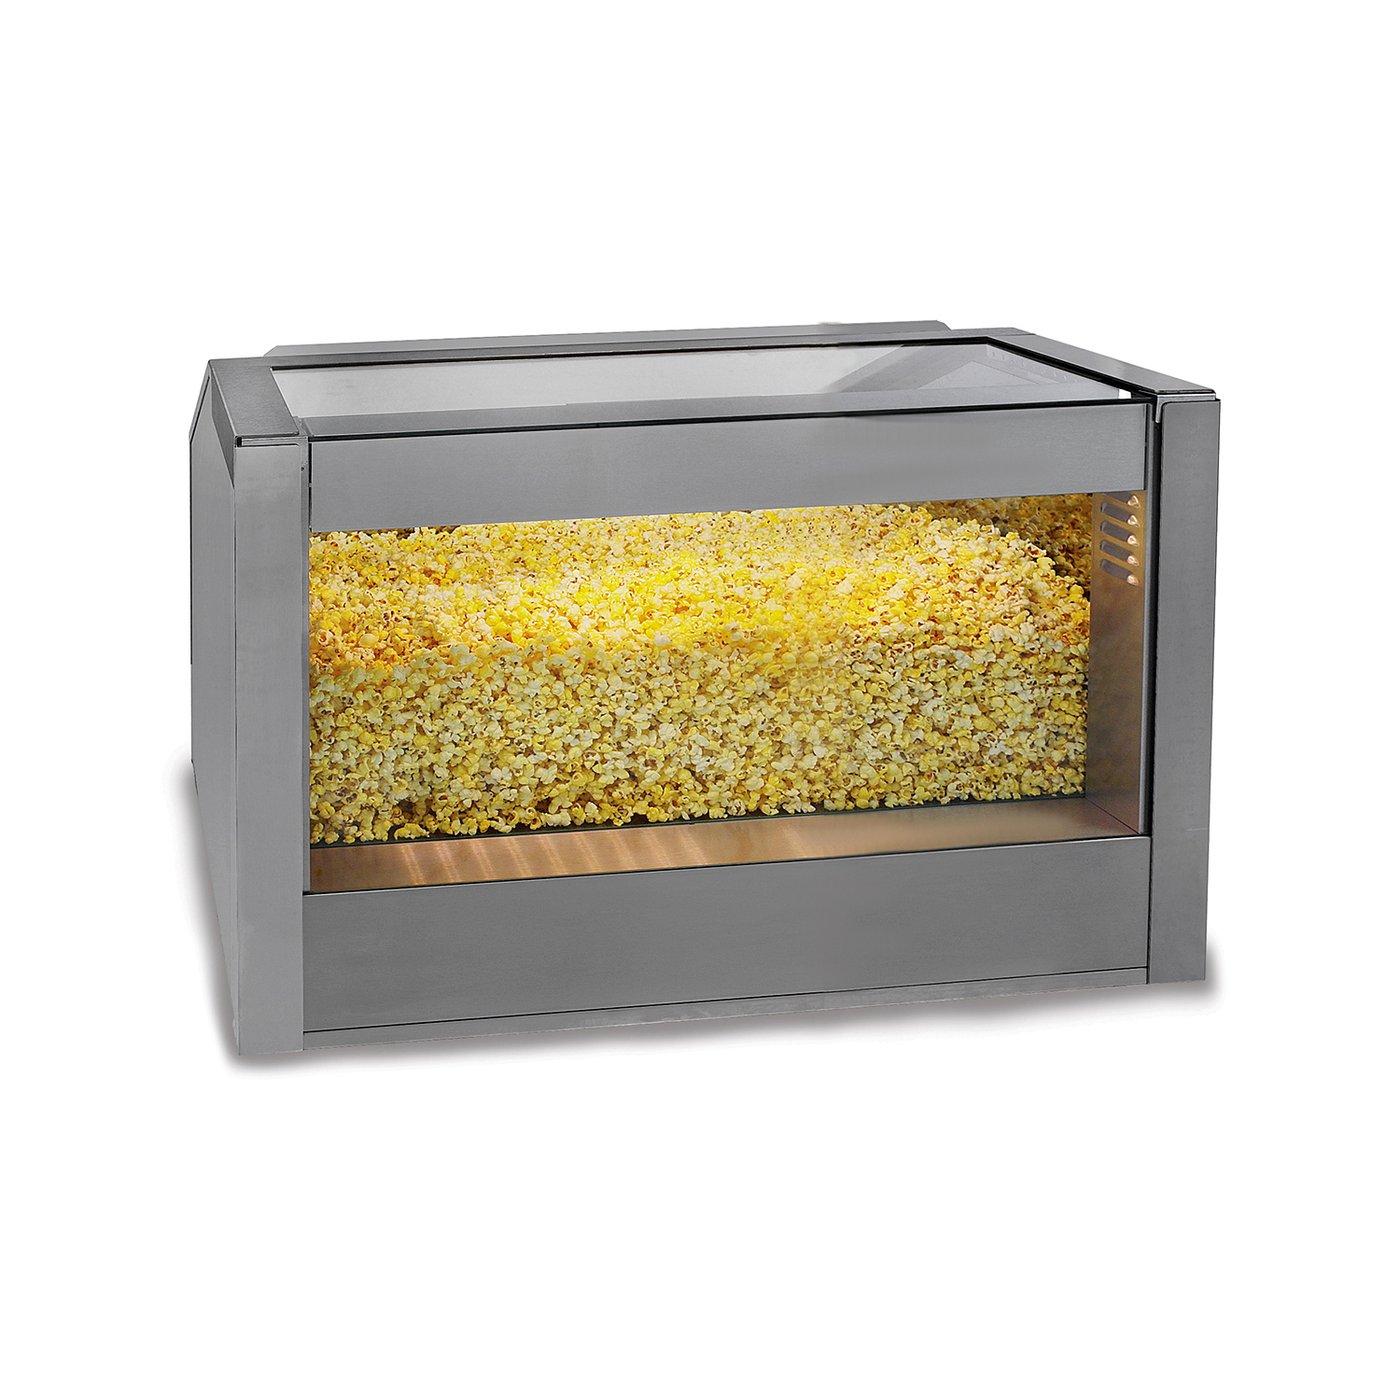 https://www.kitchenrama.com/wp-content/uploads/2019/01/Counter-Popcorn-Staging-Cabinet-30-inches.jpg